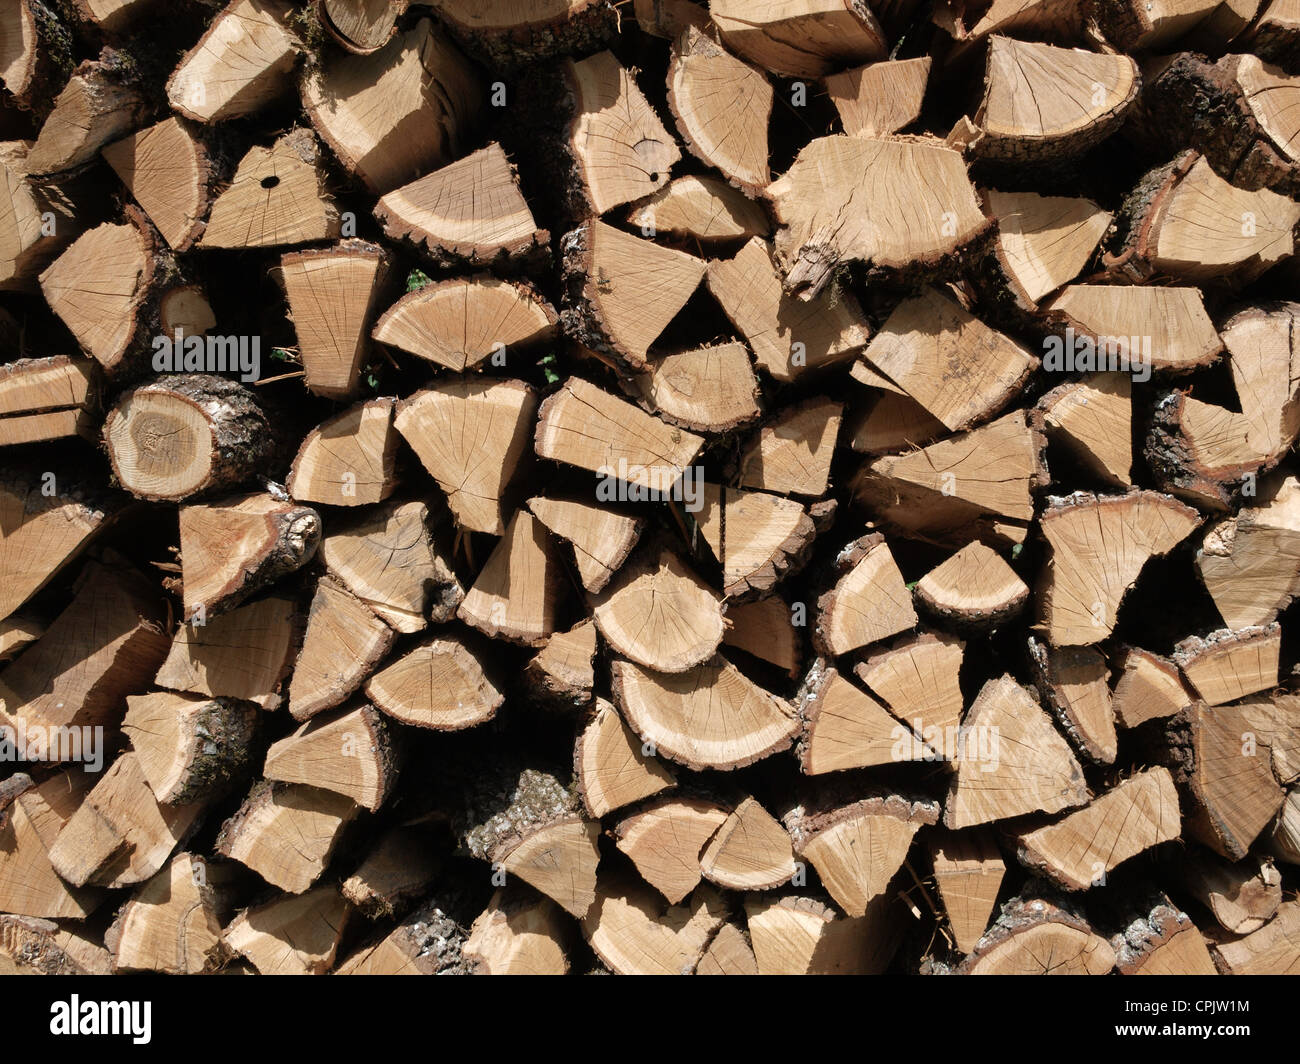 An organized pile of firewoods Stock Photo